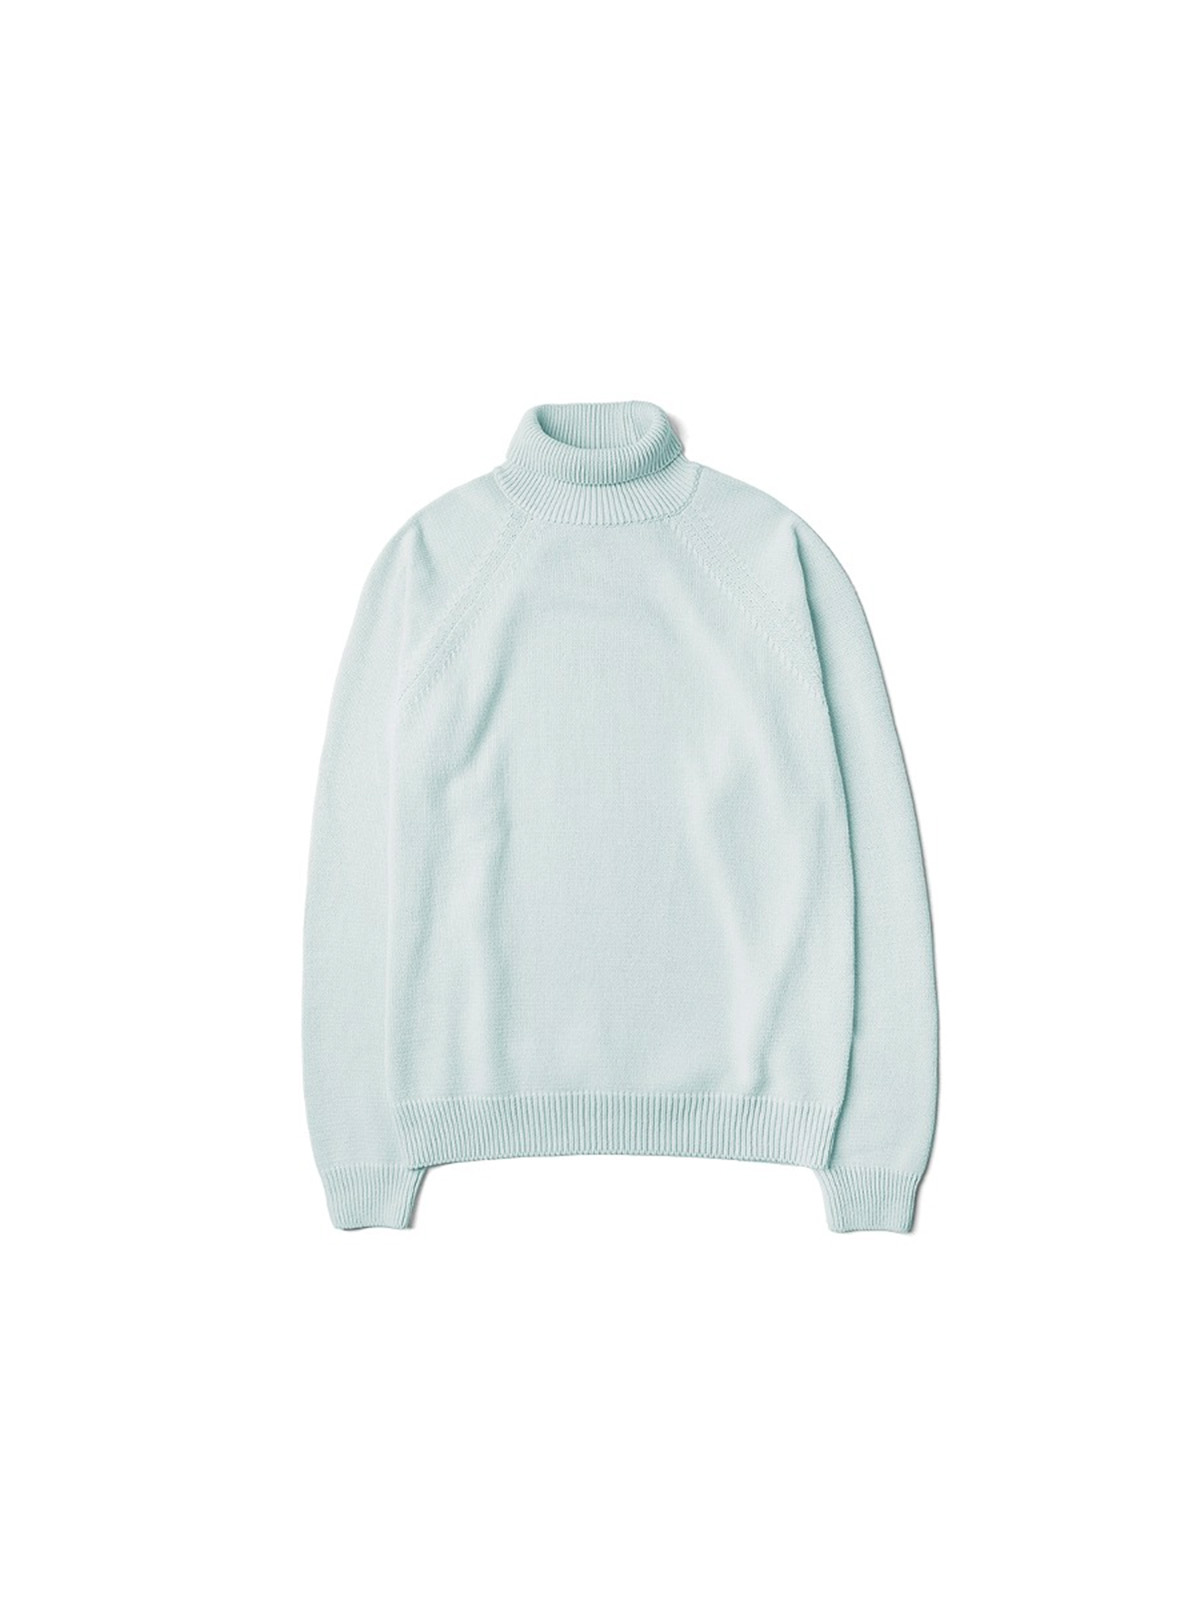 BOXER HIGH NECK KNITTED SWEATER (FADED MINT)